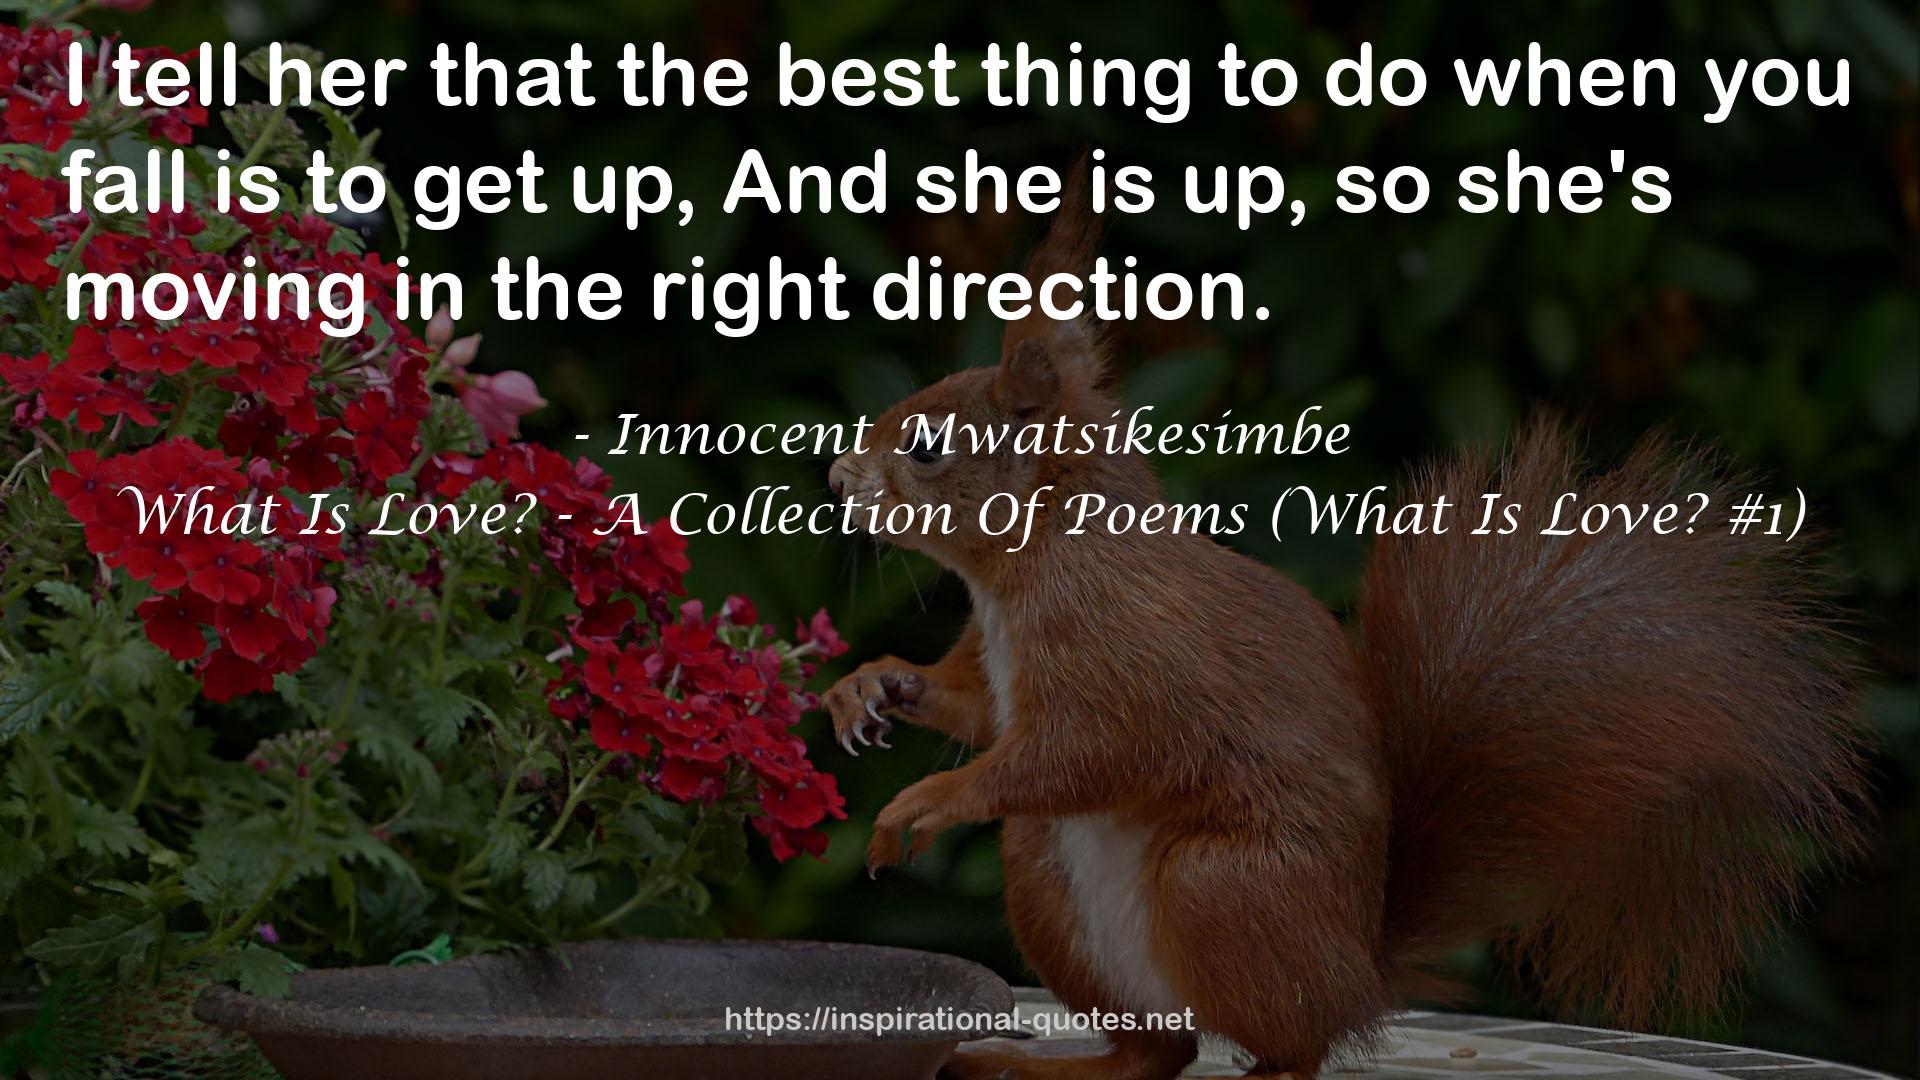 What Is Love? - A Collection Of Poems (What Is Love? #1) QUOTES